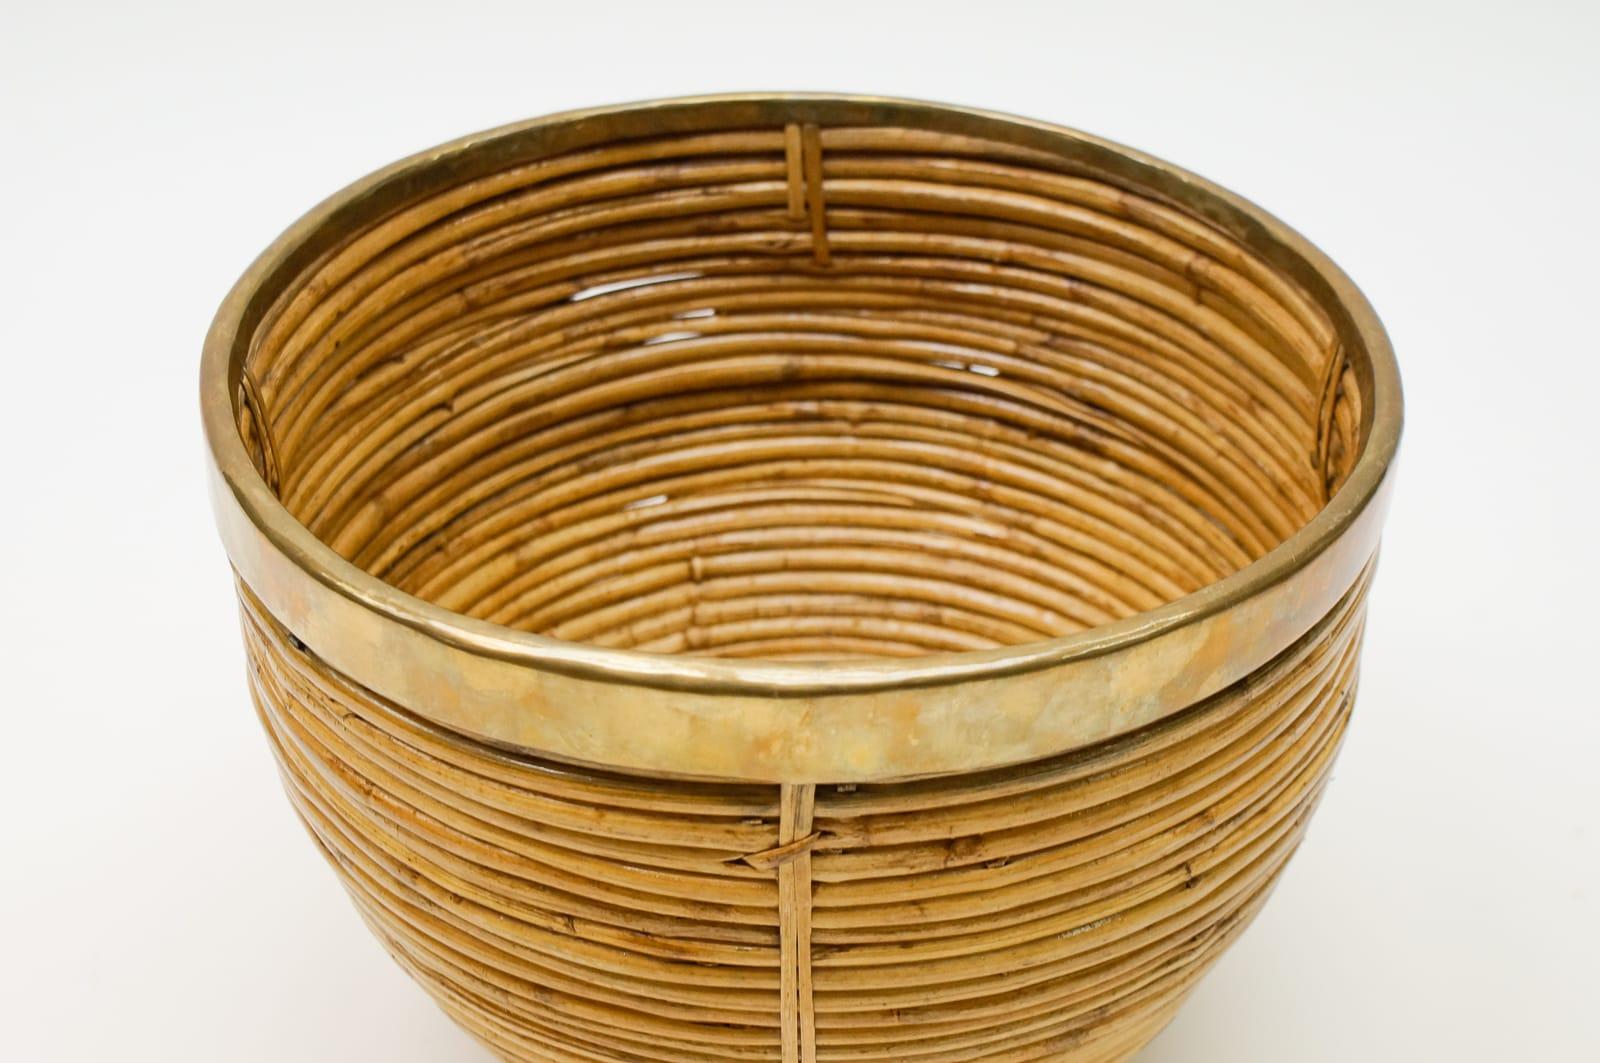 Large Rattan and Brass Midcentury Handcrafted Bowl, Austria, 1950s For Sale 1